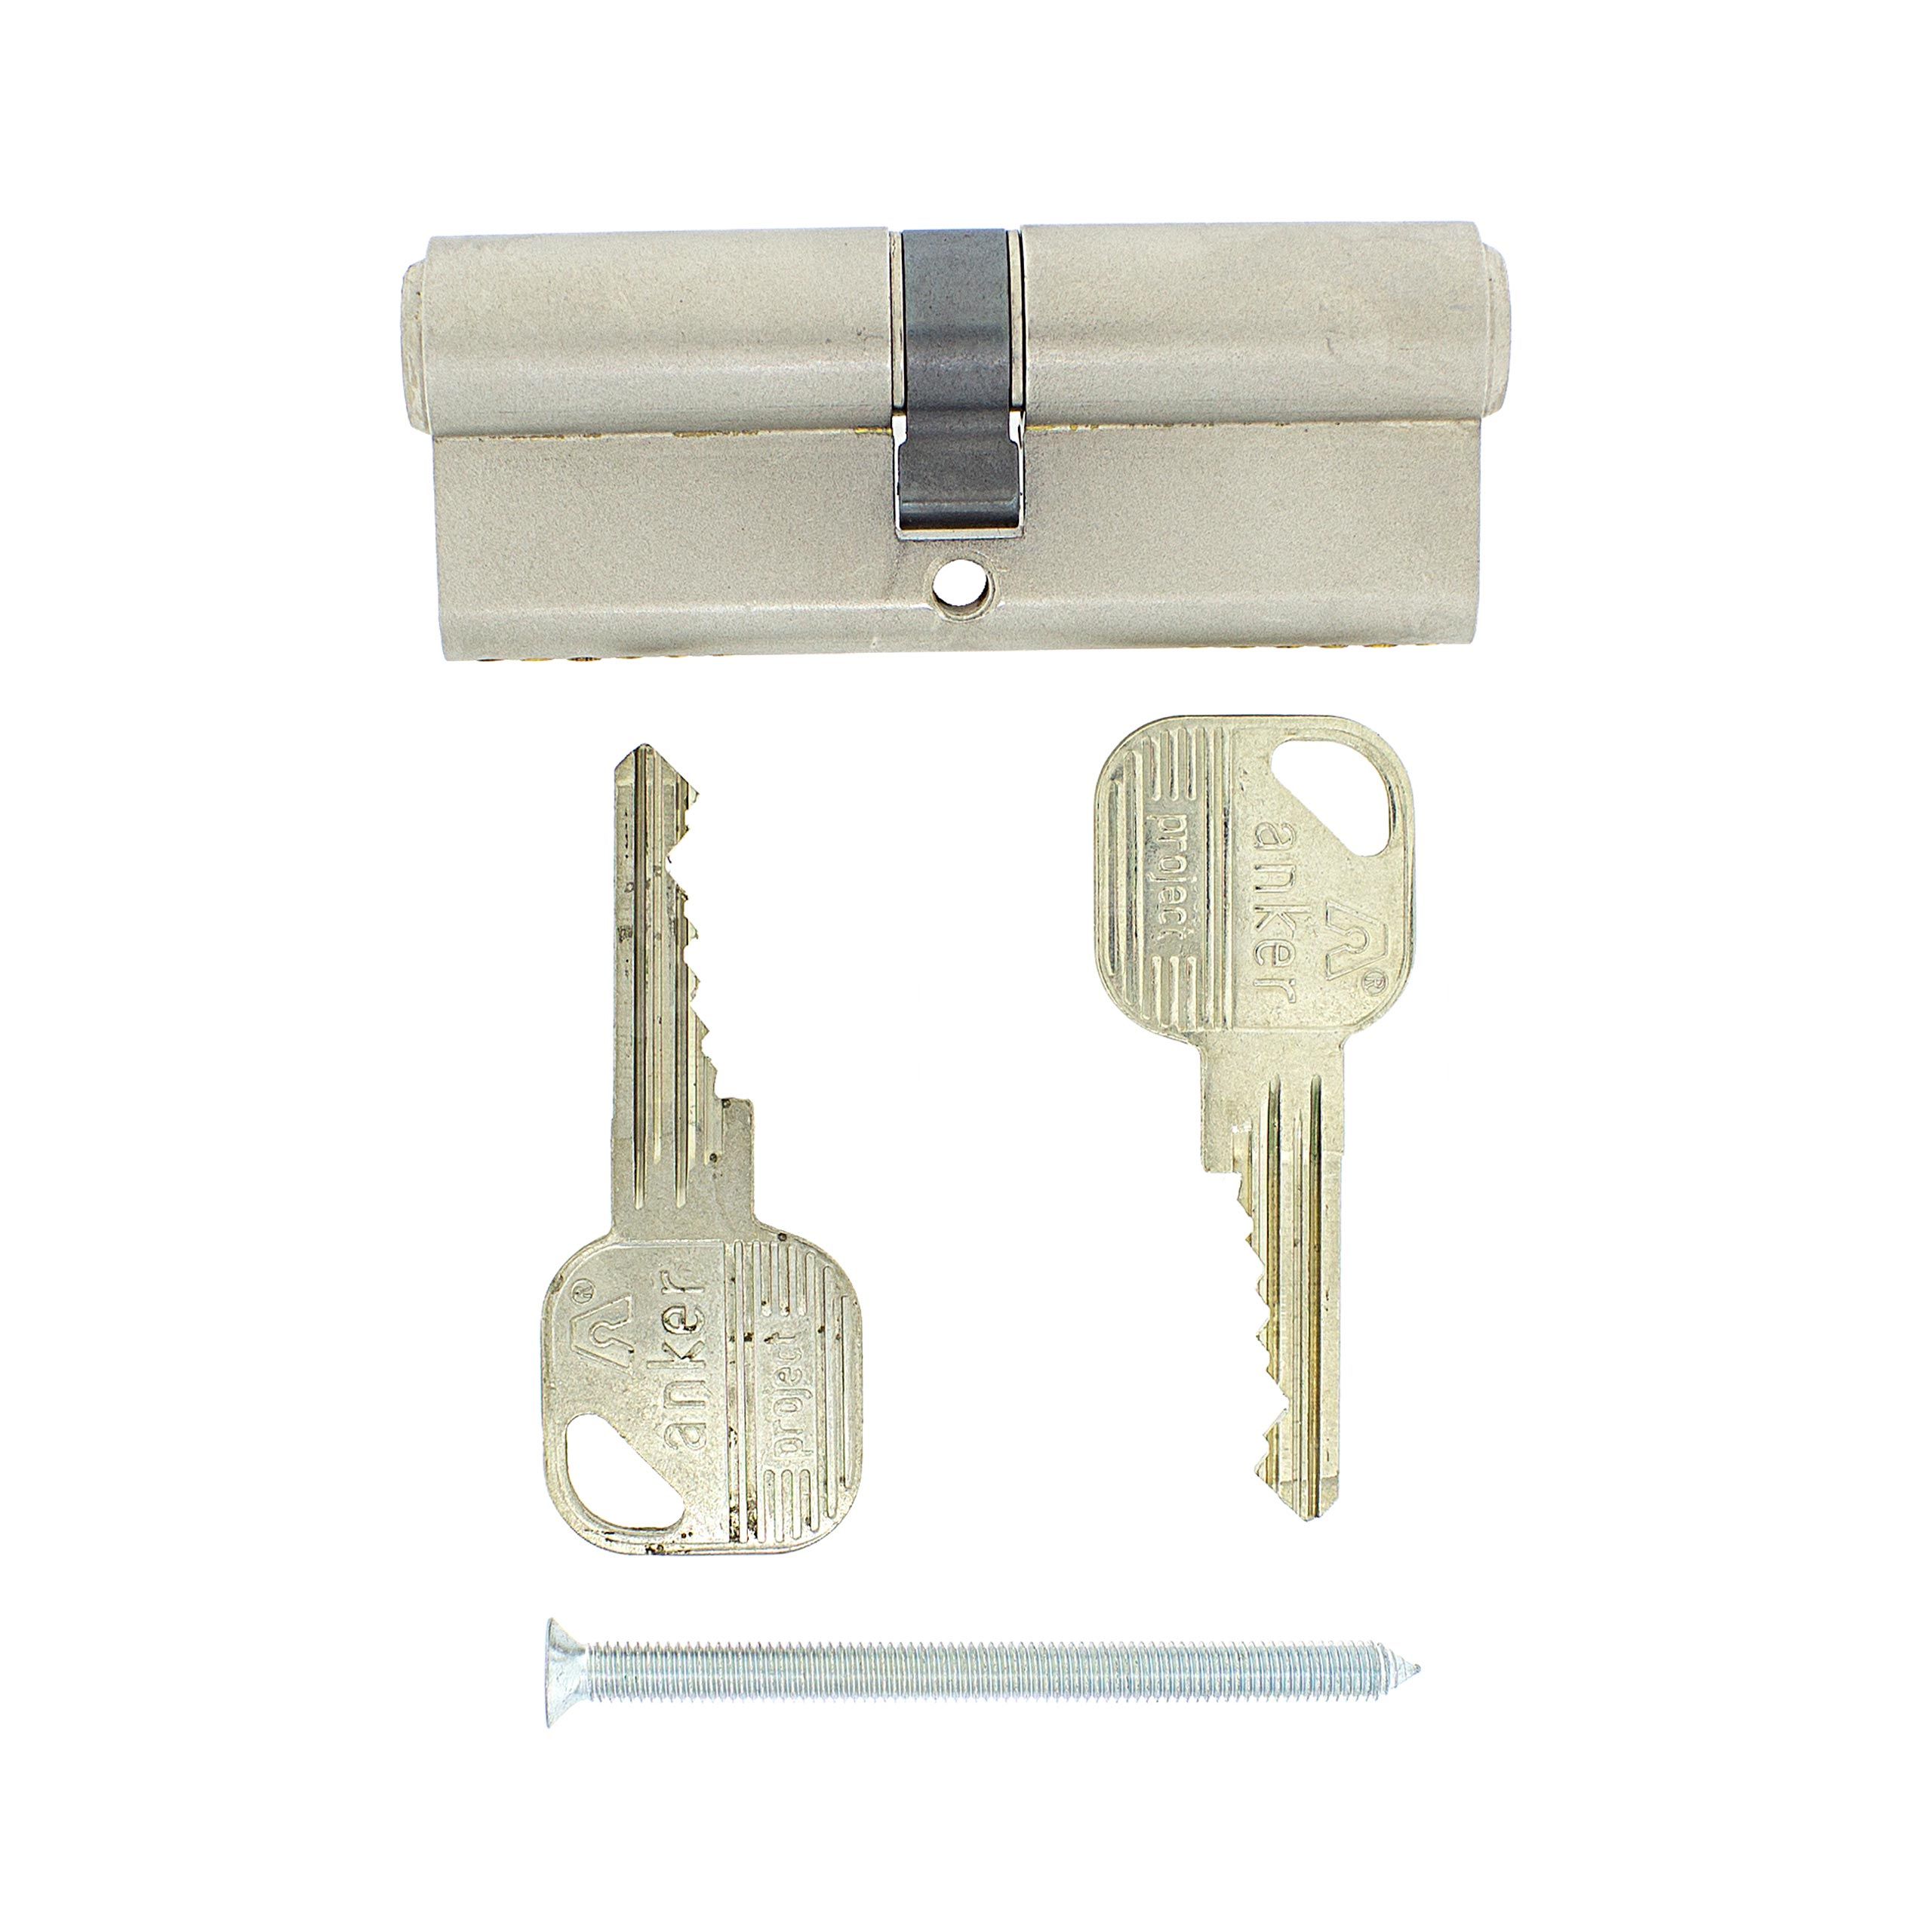 Dimensions Image: Ankerslot Euro Double Cylinder Registered Key Section